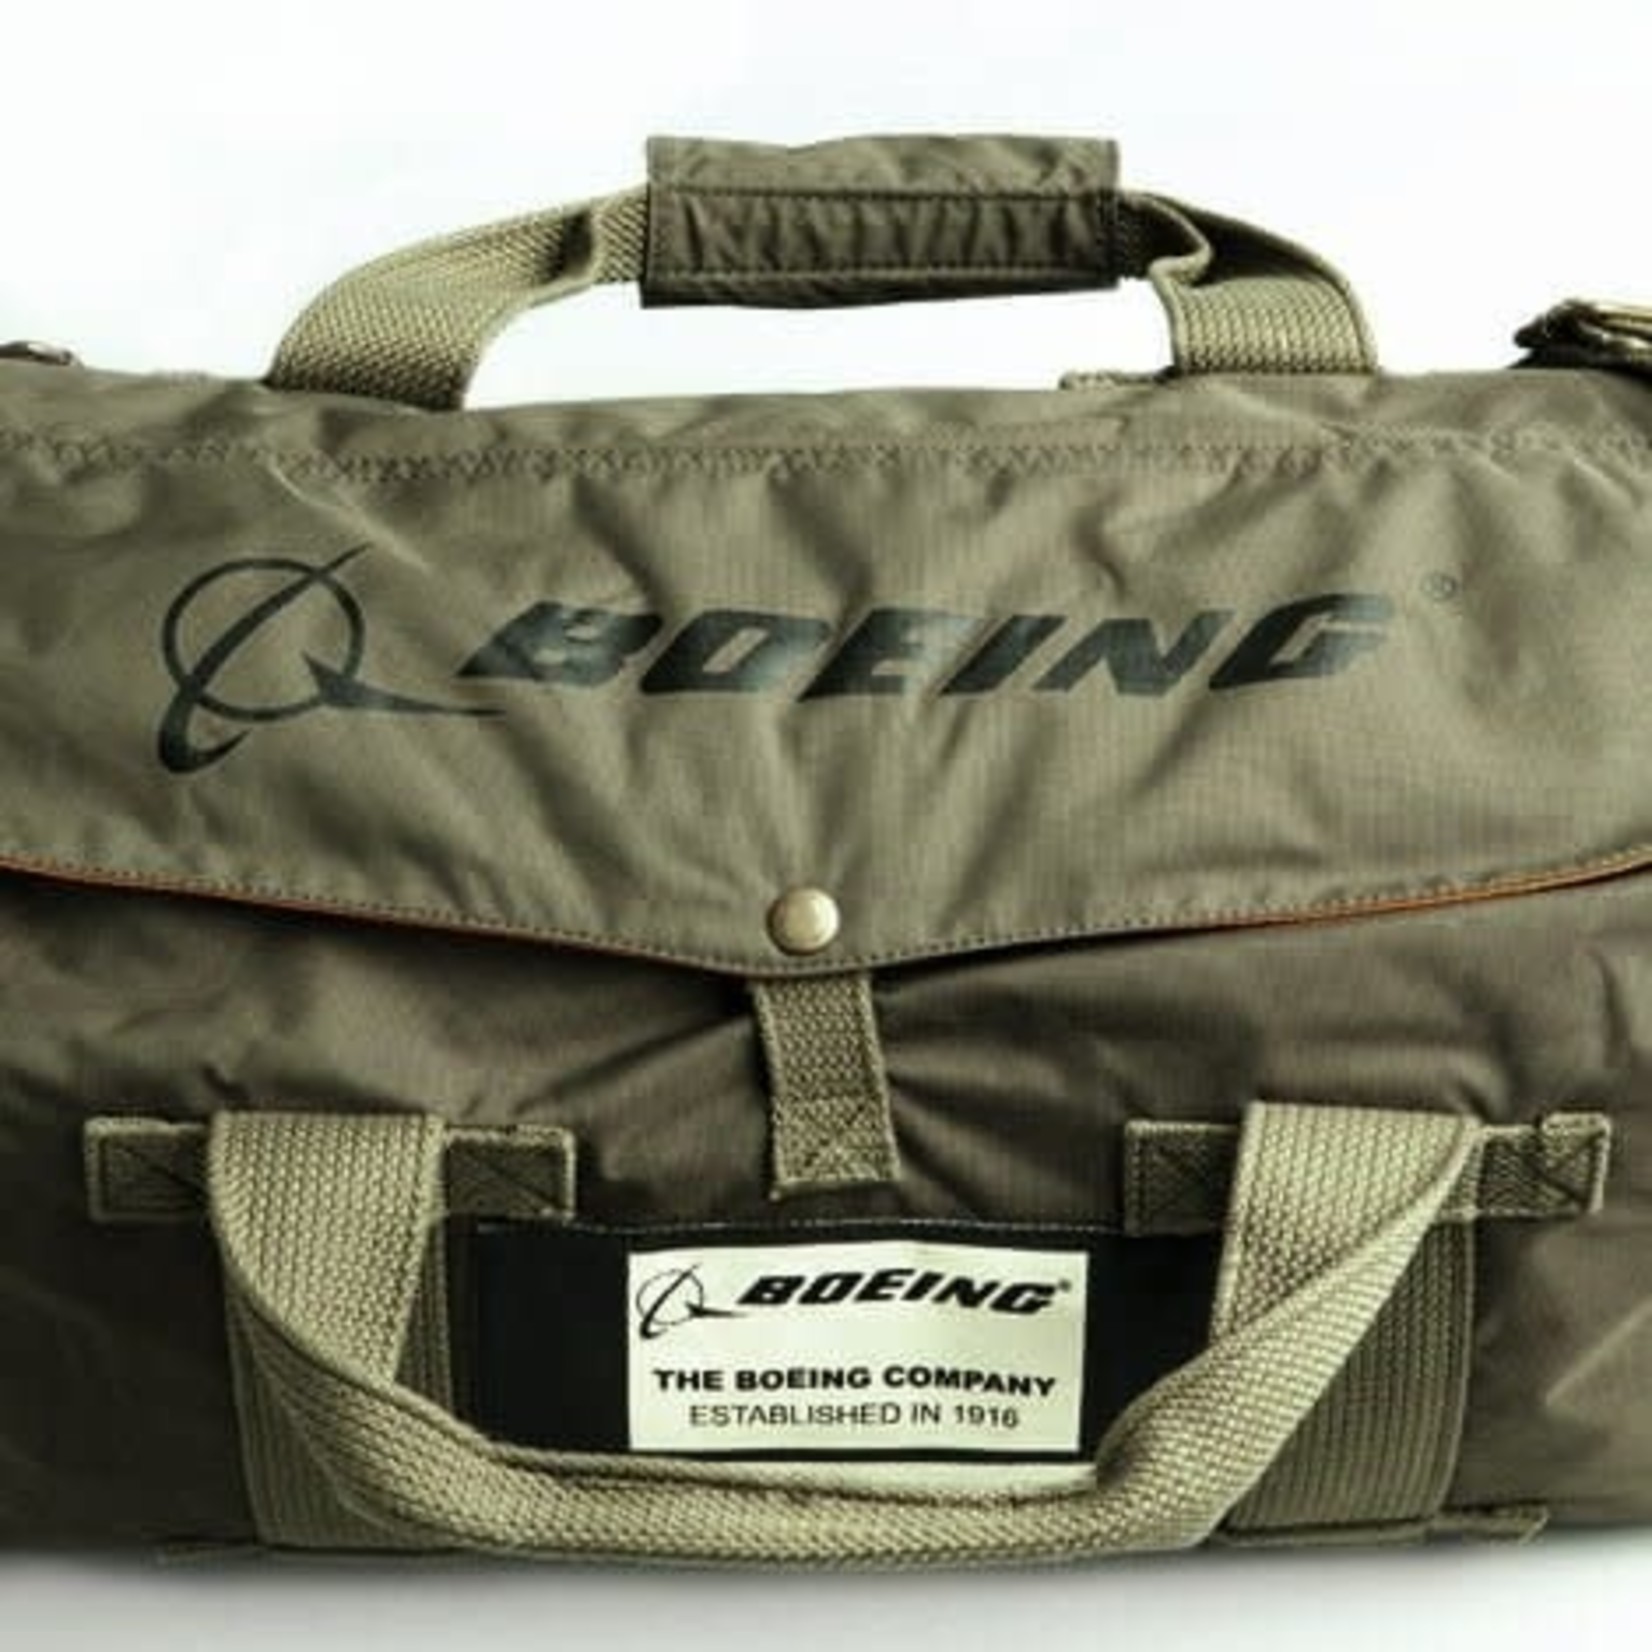 Aviation and Space Stow Bag Boeing Totem